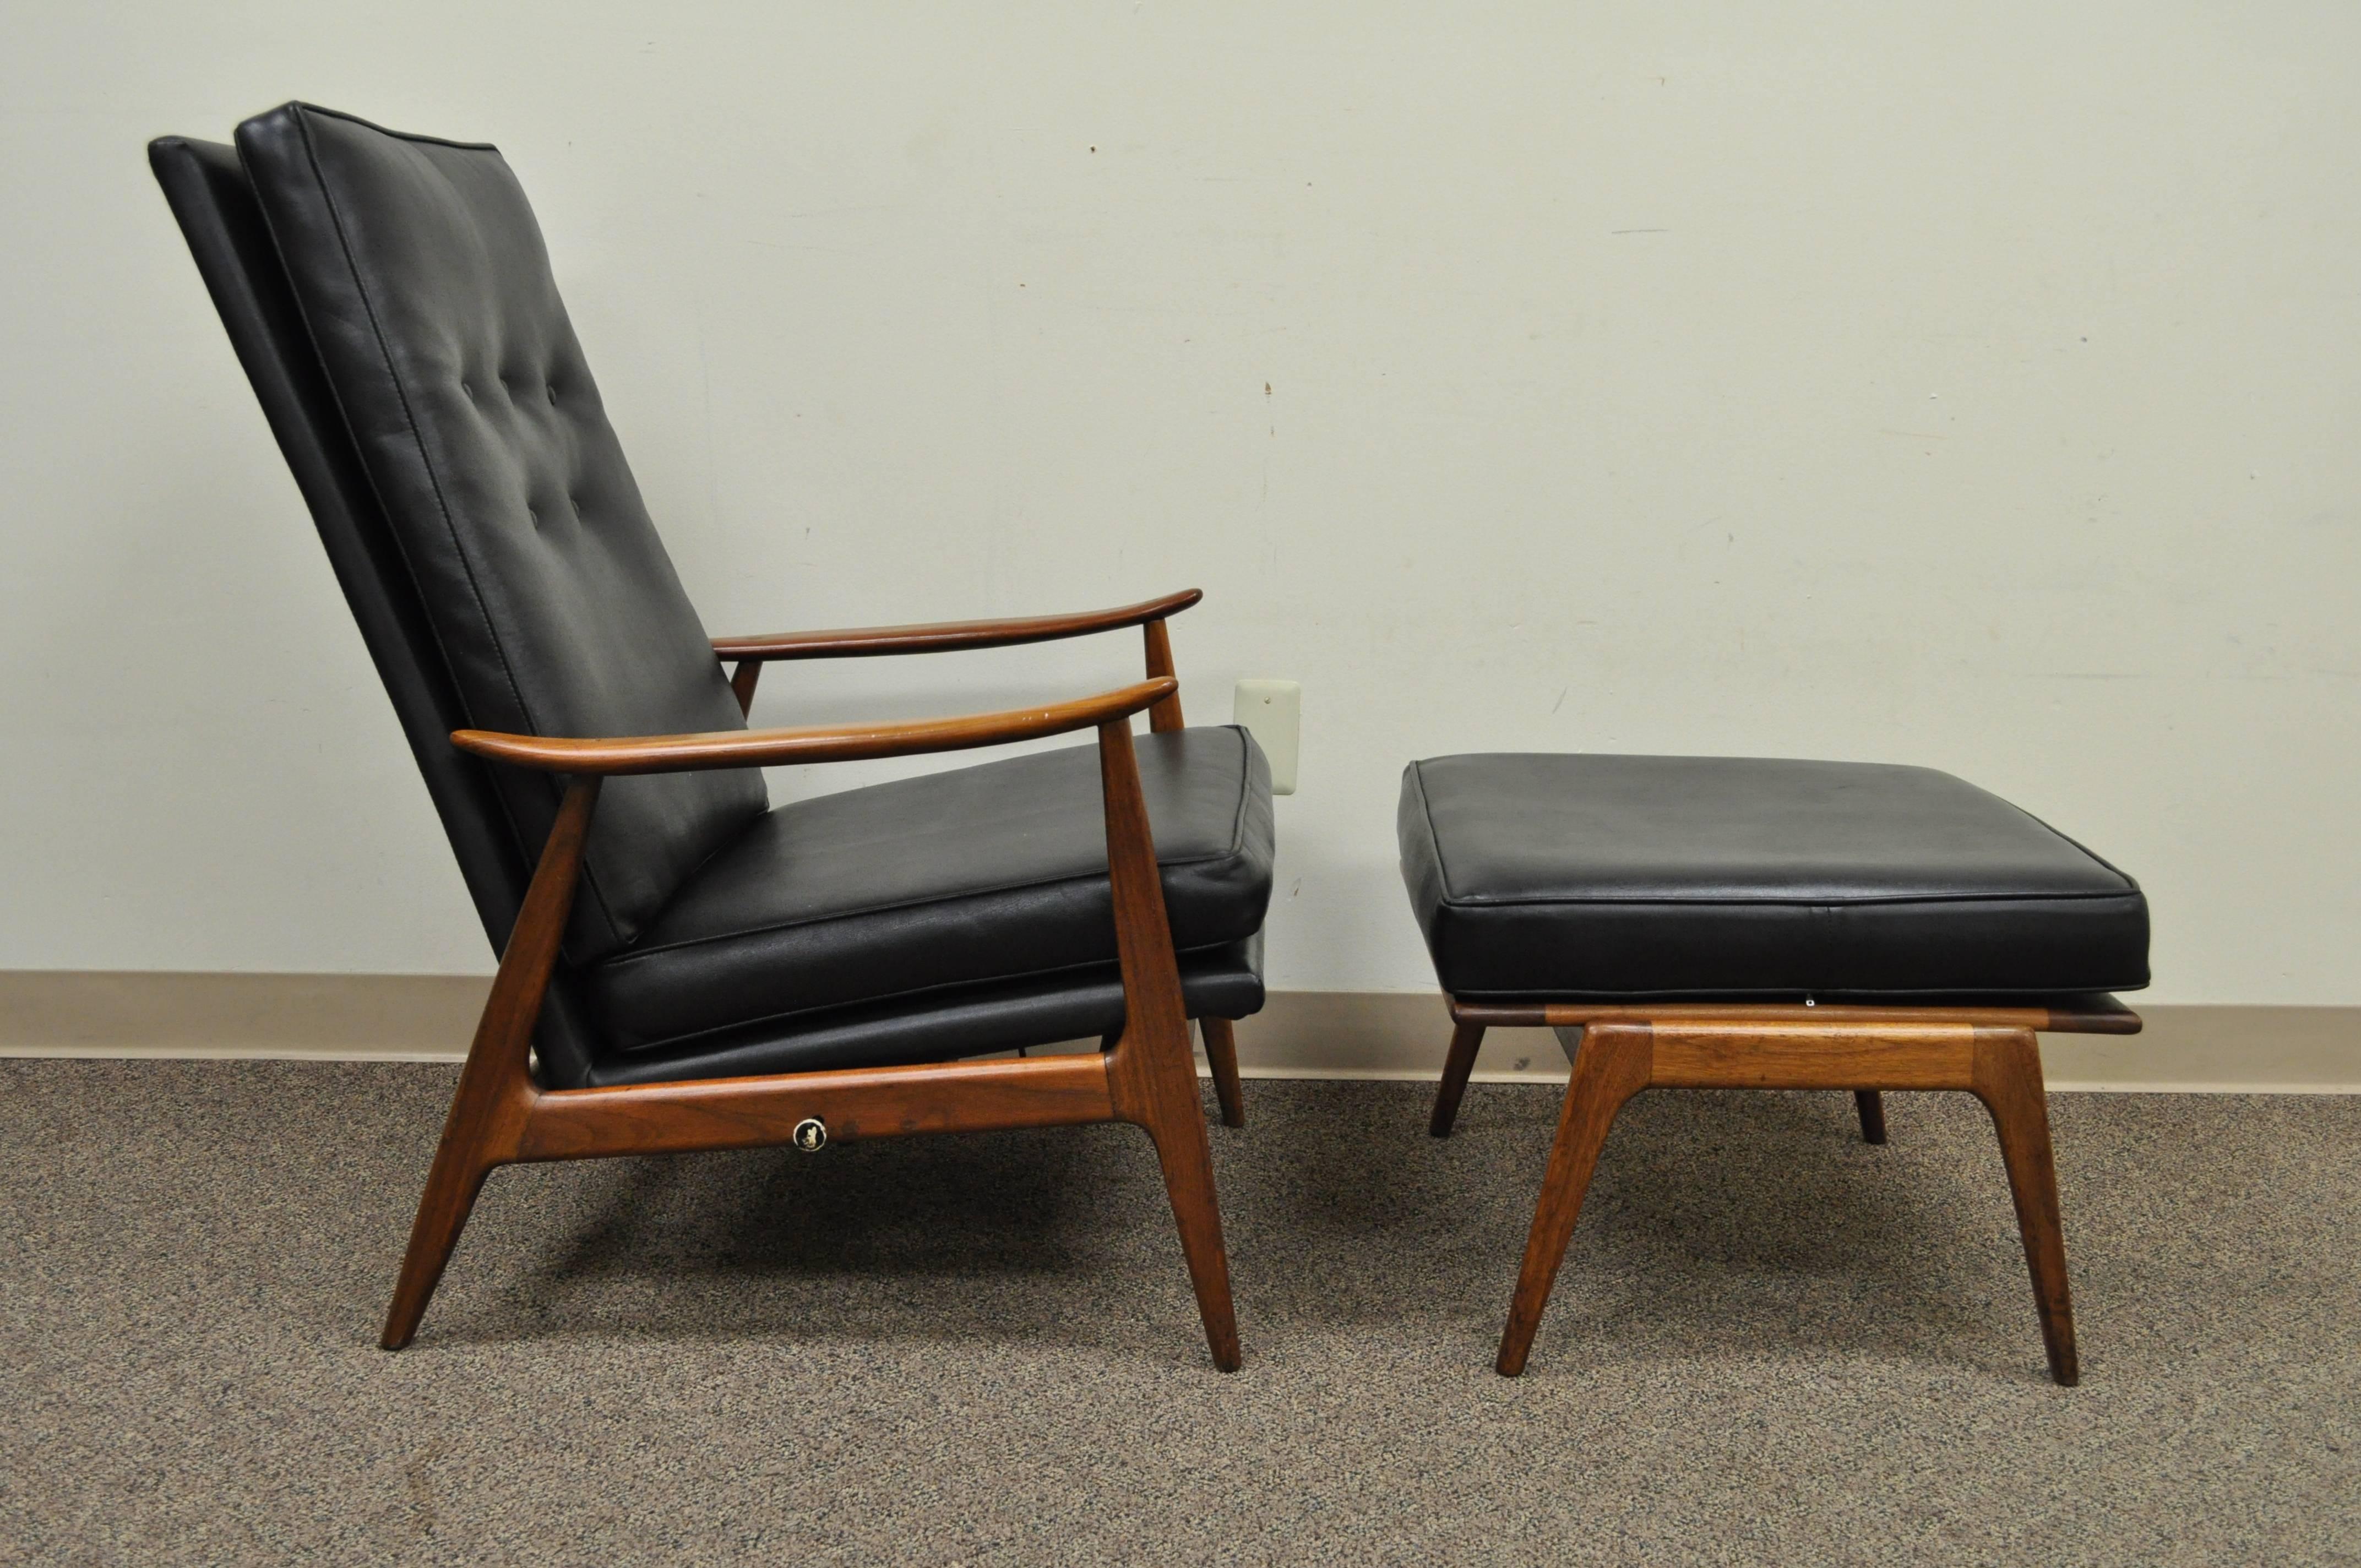 Early Milo Baughman designed sculpted frame reclining walnut lounge chair and matching ottoman for James, Incorporated (An early division of Thayer Coggin) Chair features eight very comfortable reclining positions and the original black vinyl